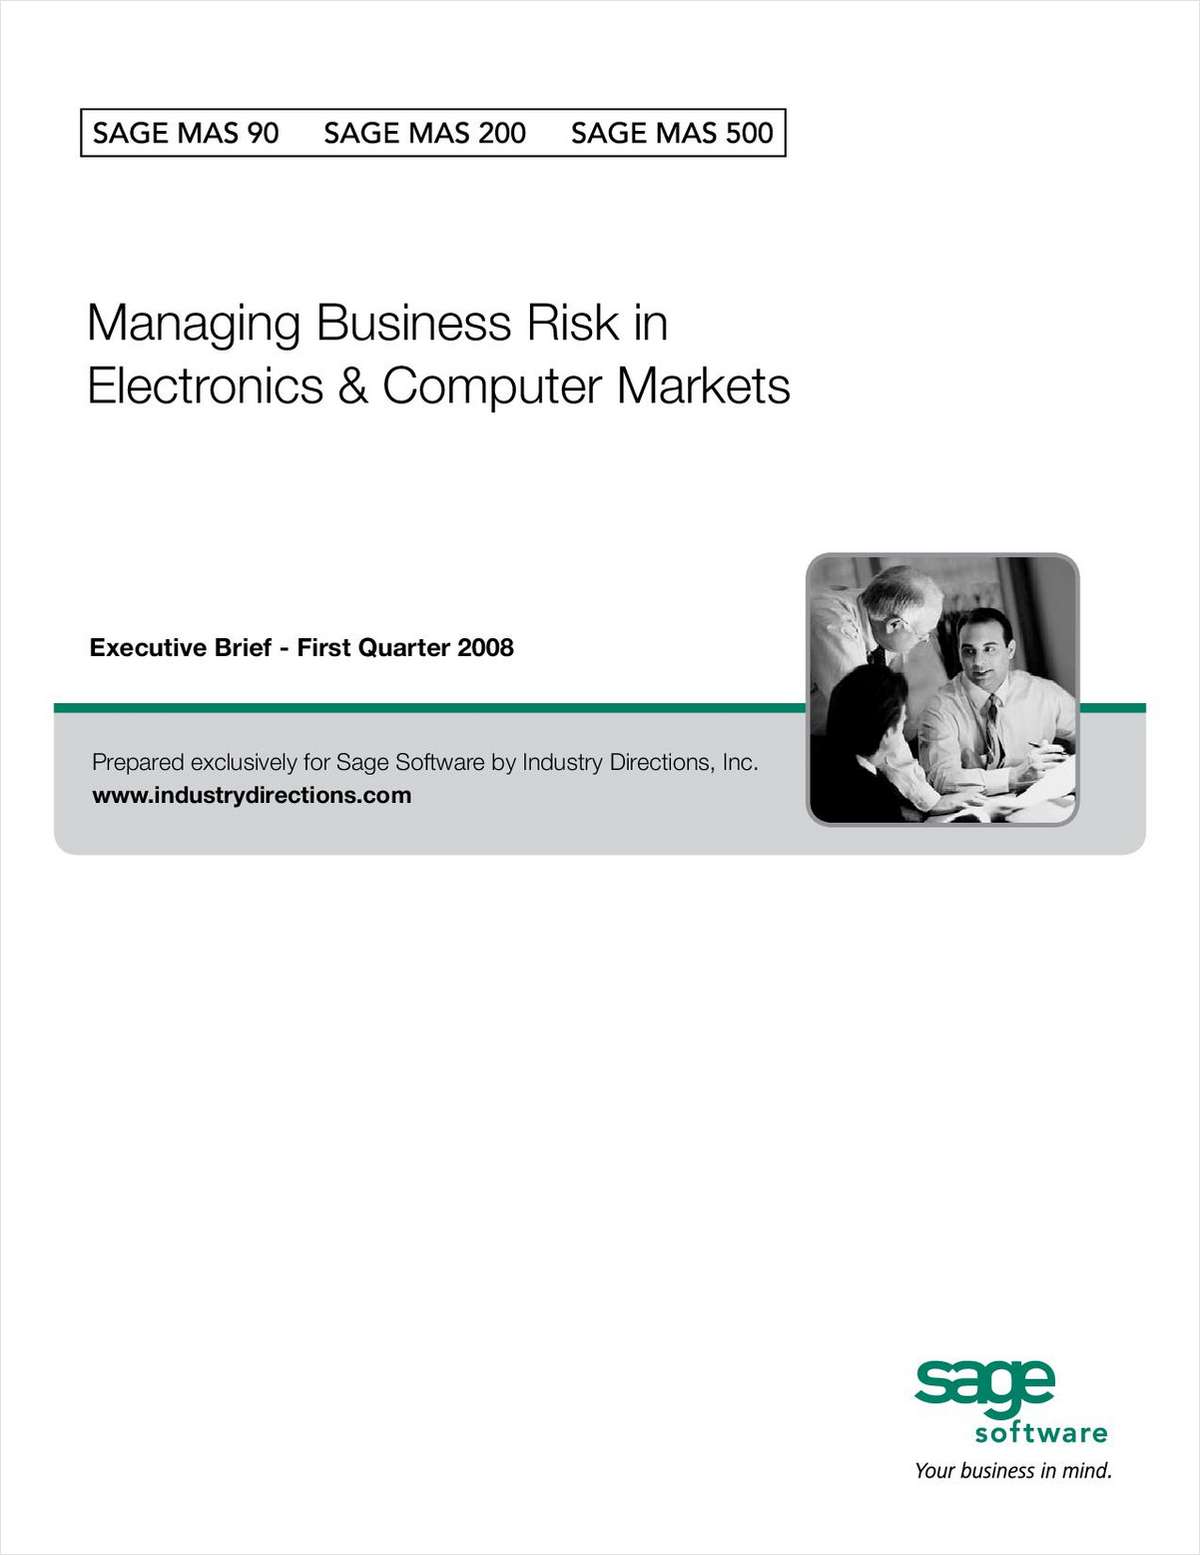 Managing Business Risk in Electronics and Computer Markets